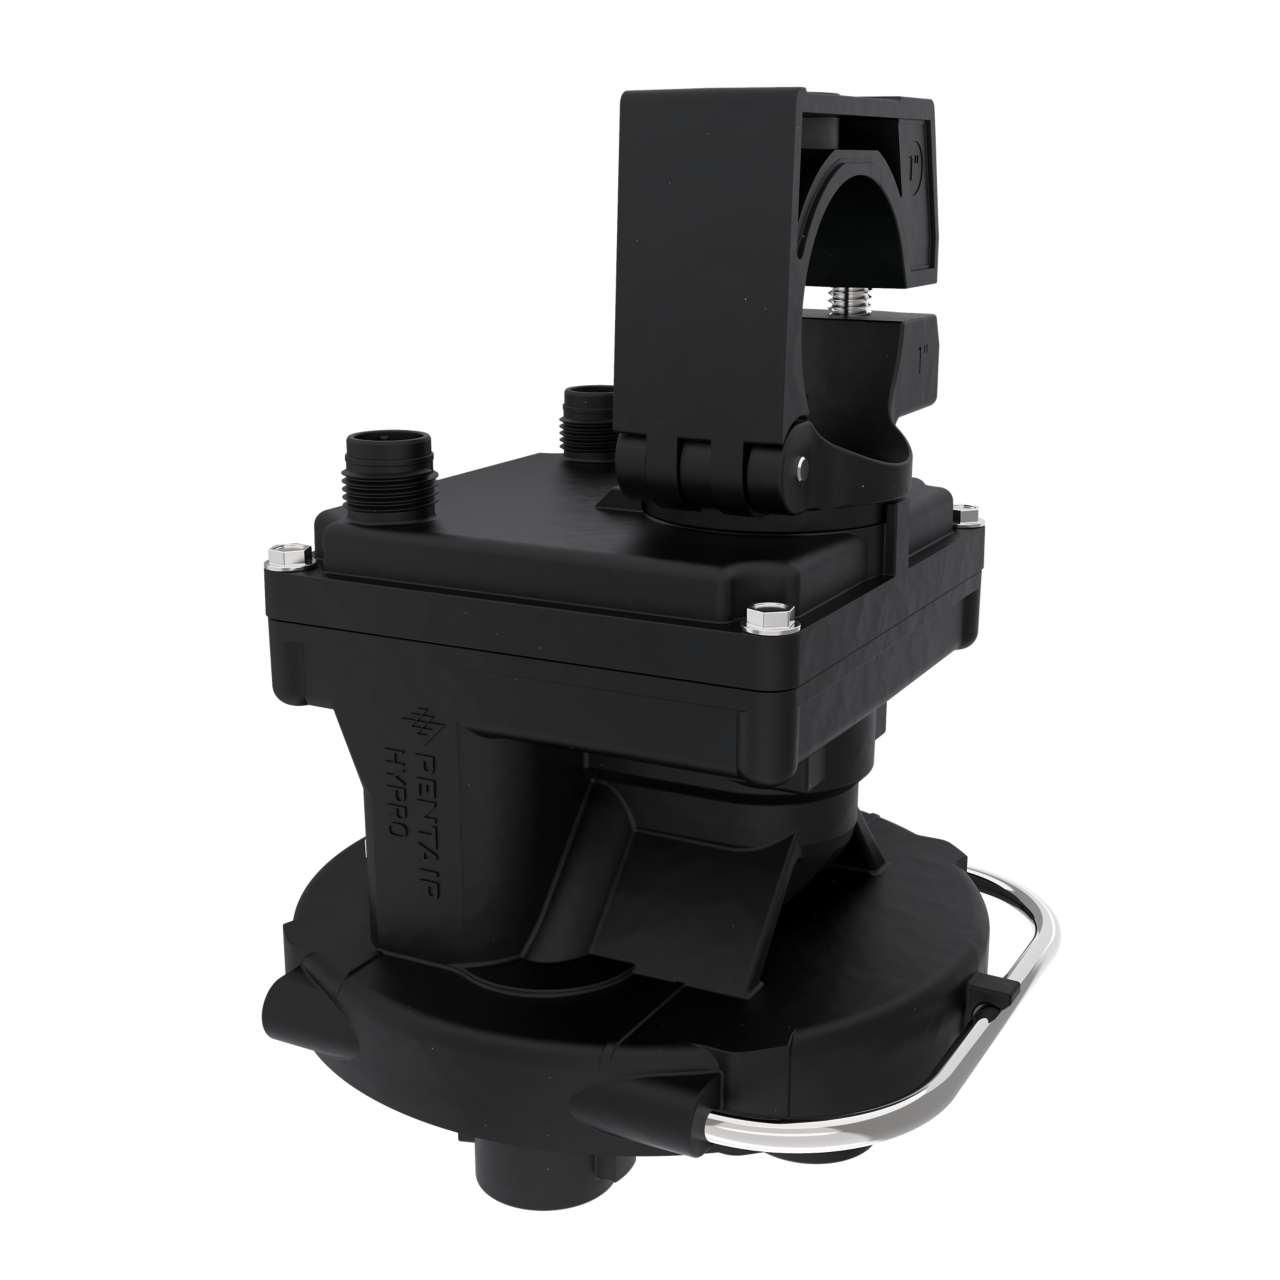 This is the Hypro ProStop-E nozzle body - Dual integrated with turret. 